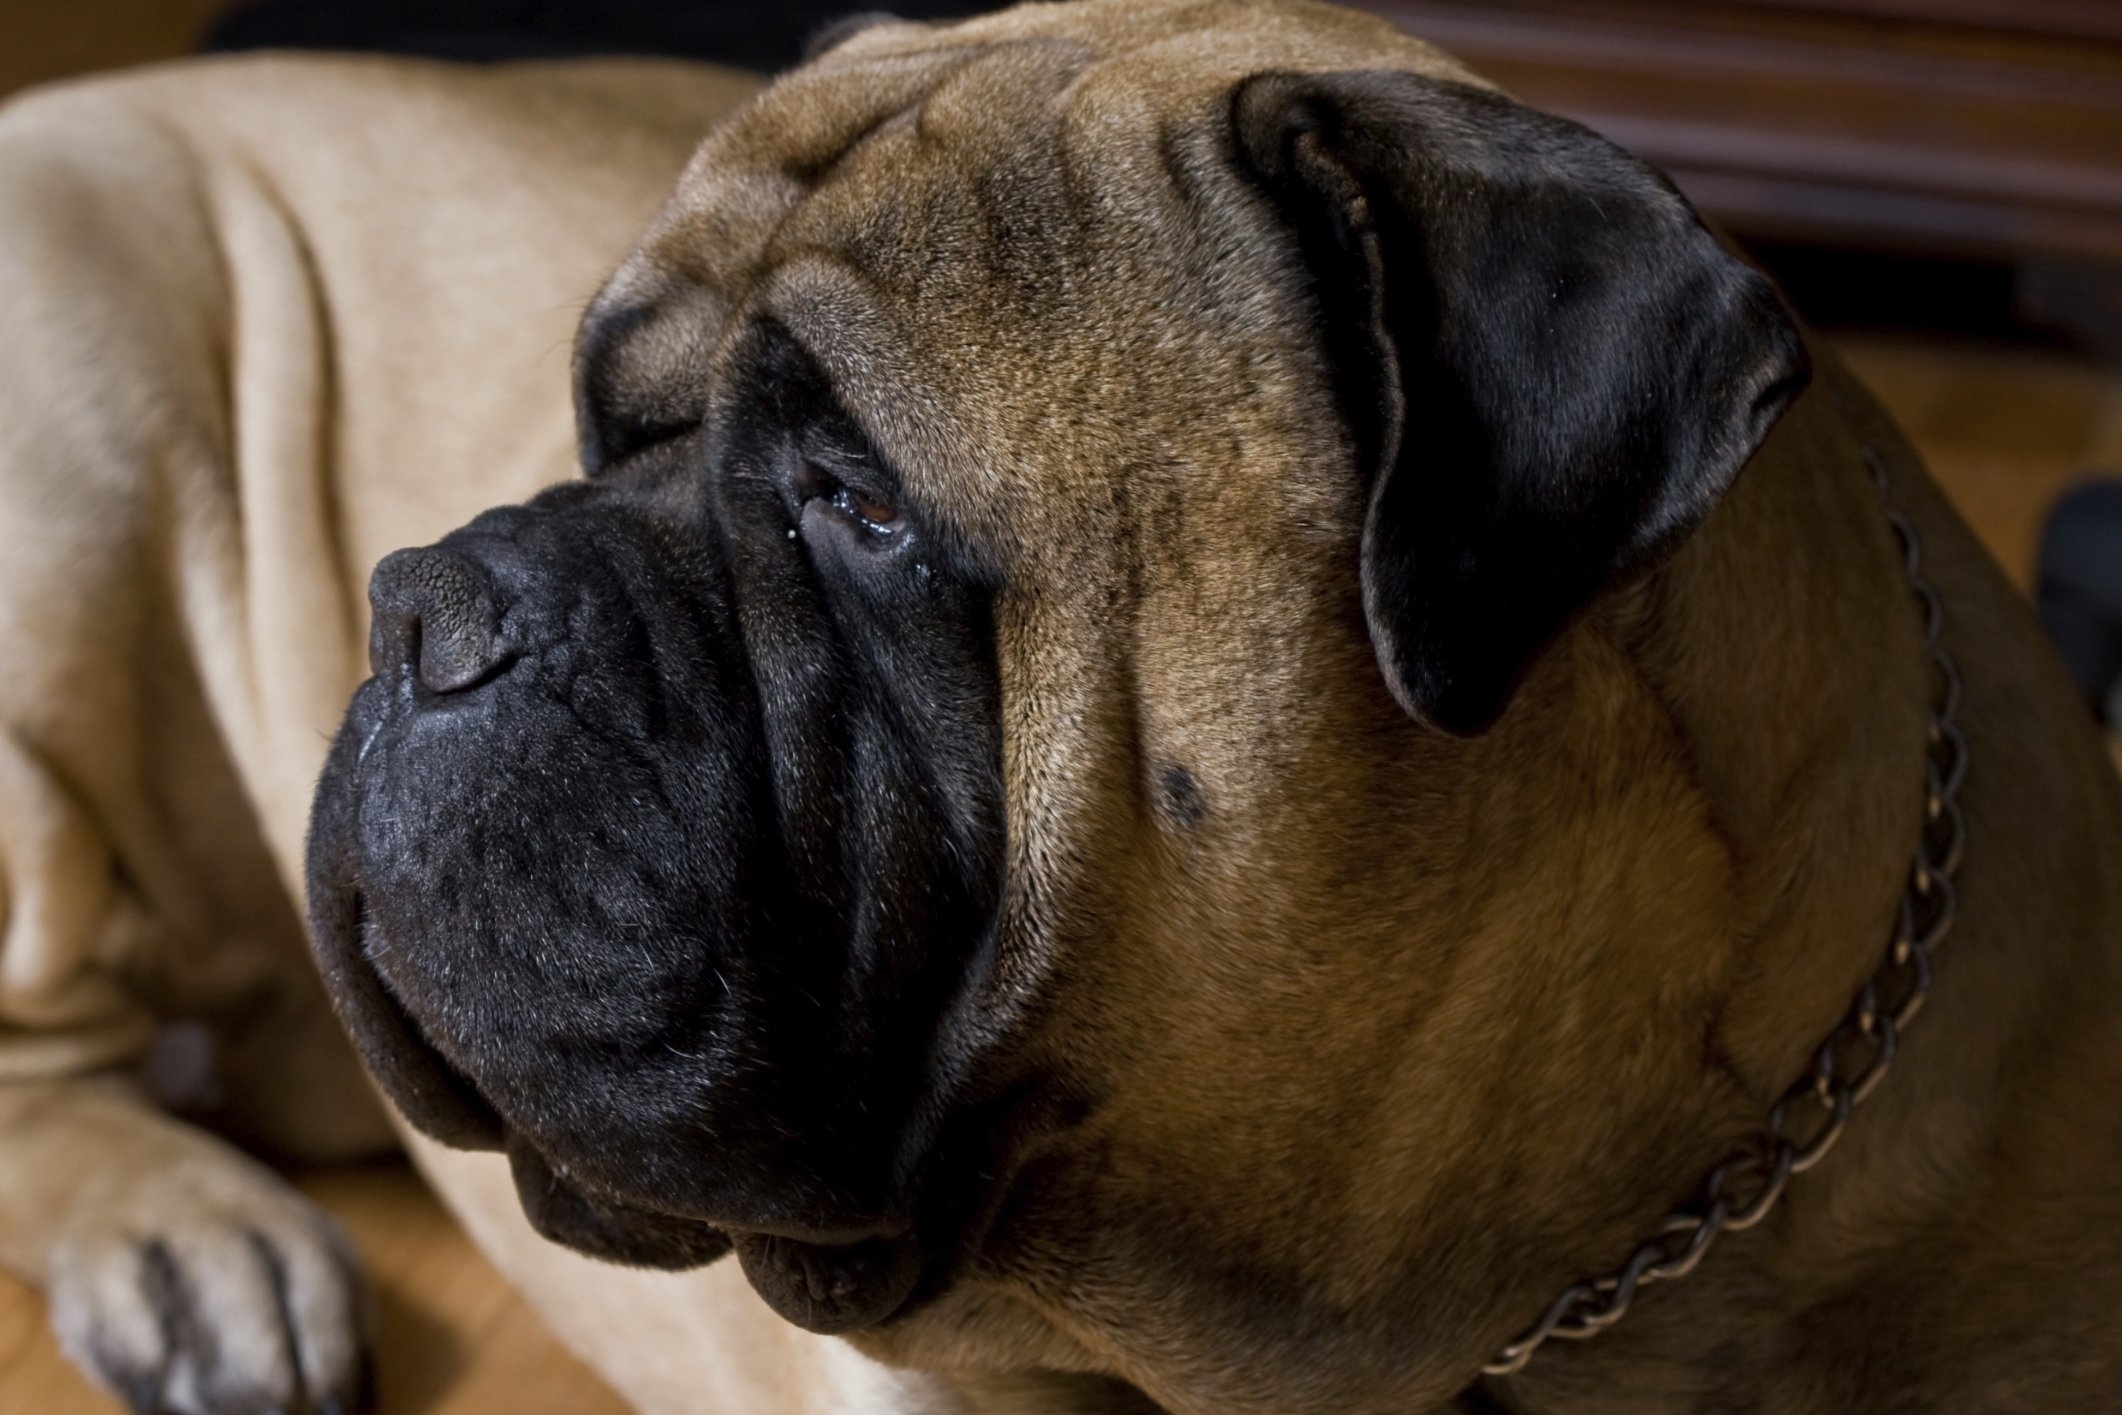 Bullmastiff dog, Protective nature, HD wallpapers, Mobile backgrounds, 2130x1420 HD Desktop